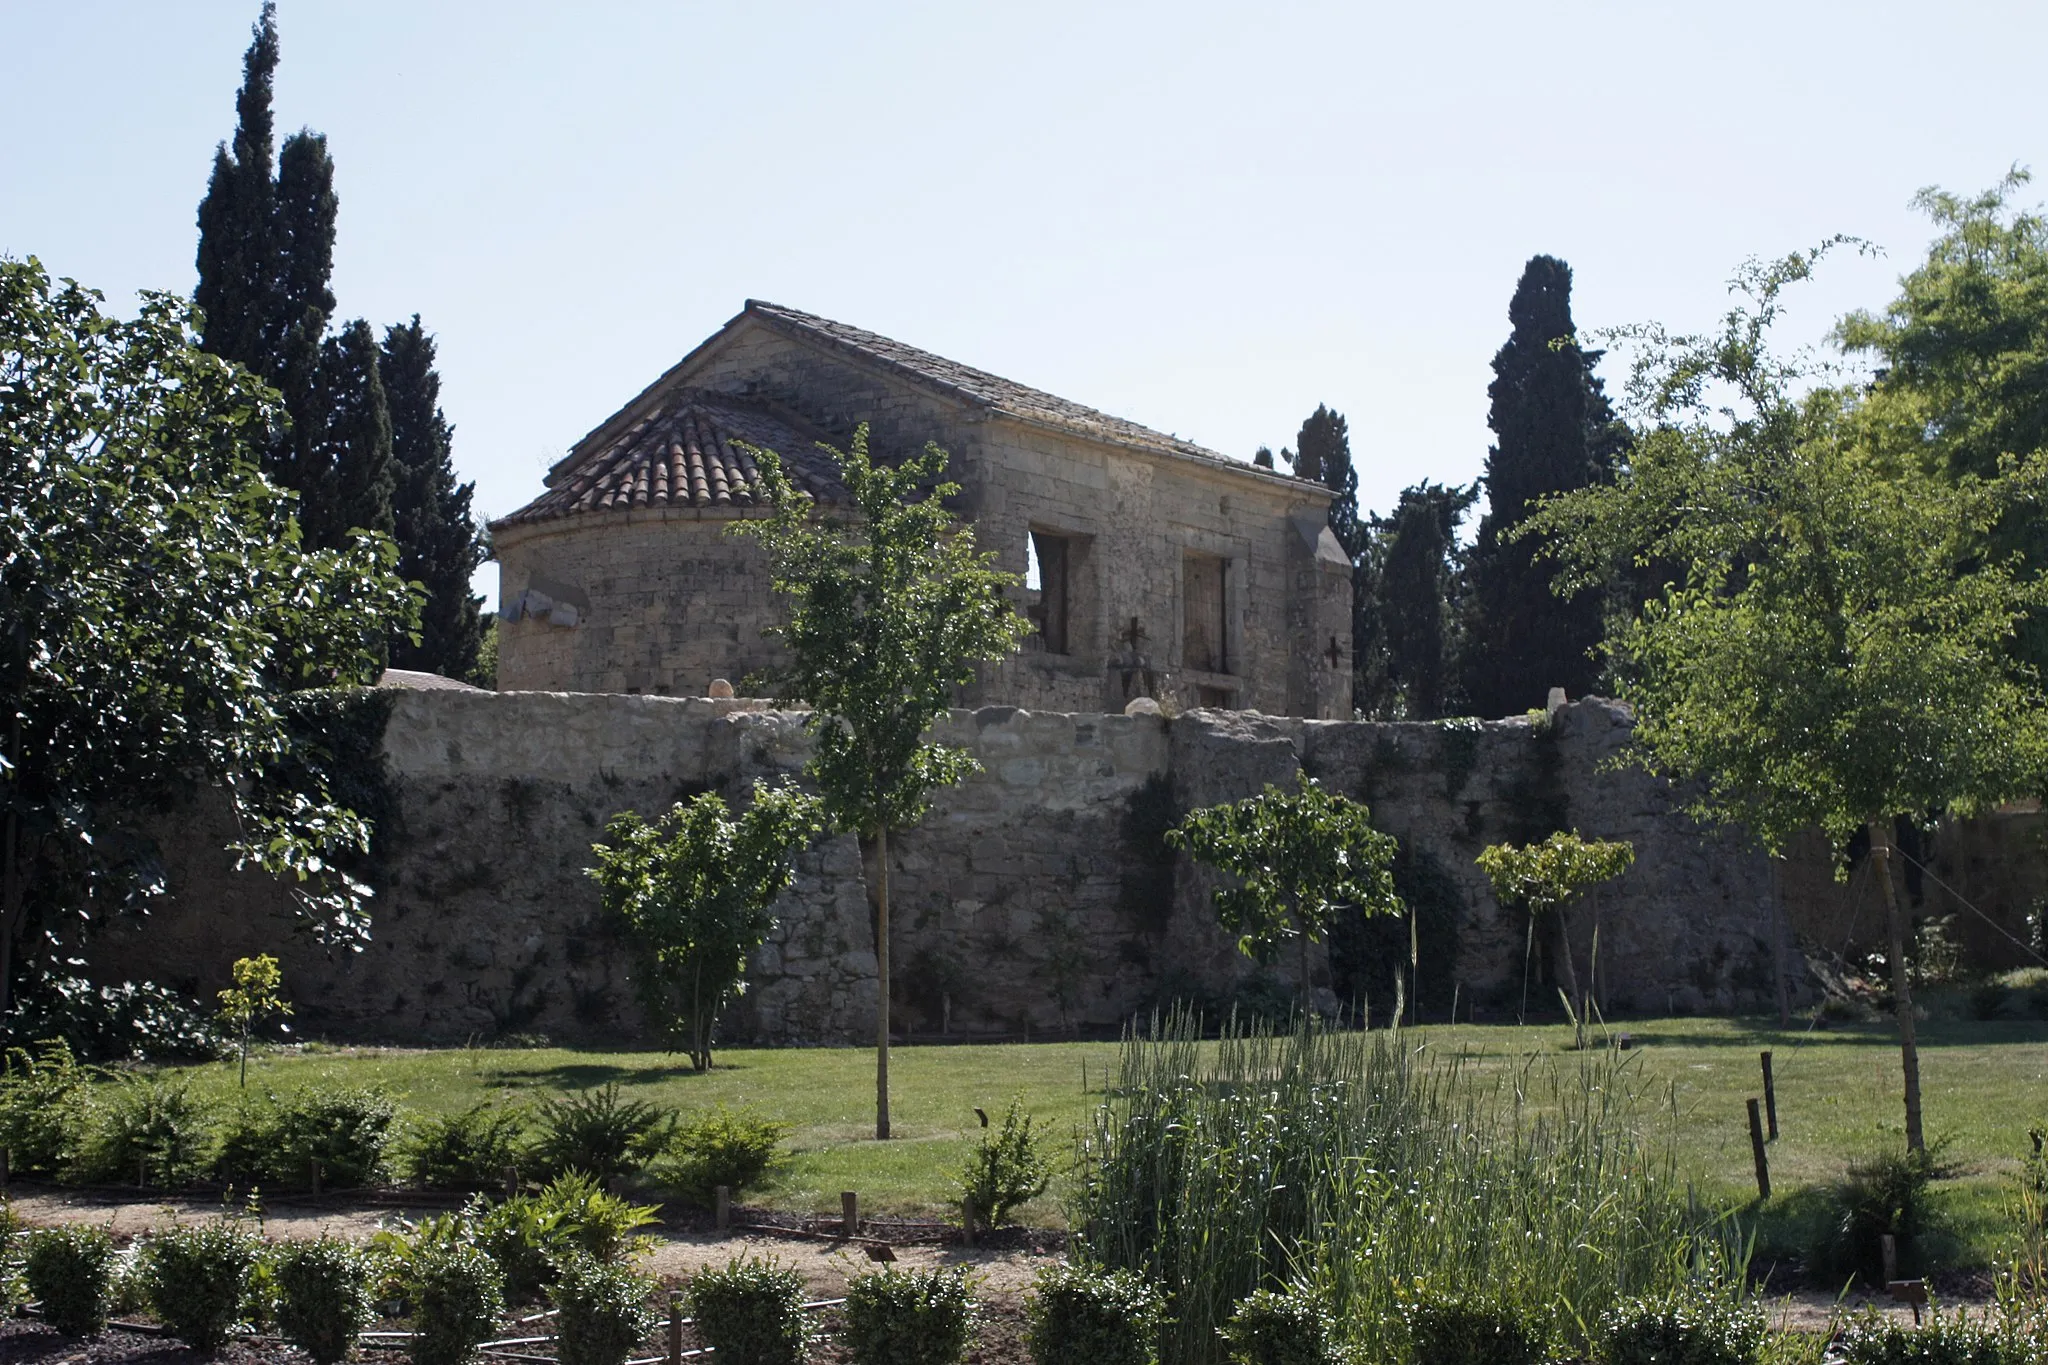 Photo showing: The orchard, just before the enclosure of the garden. In the background the ruins of the ancient chapel "San Joan dos Annels".